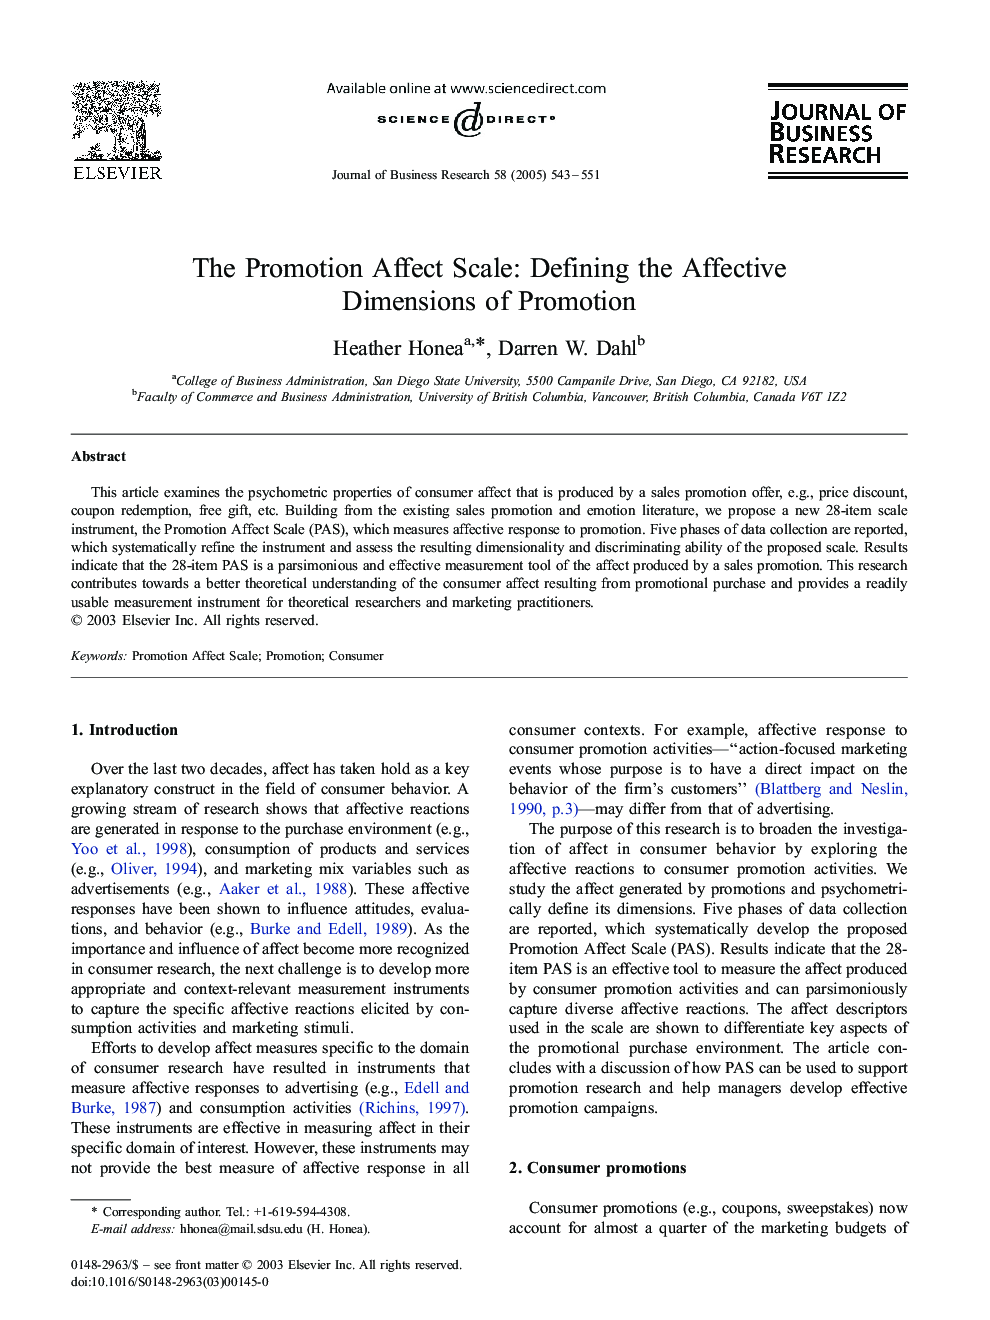 The Promotion Affect Scale: Defining the Affective Dimensions of Promotion